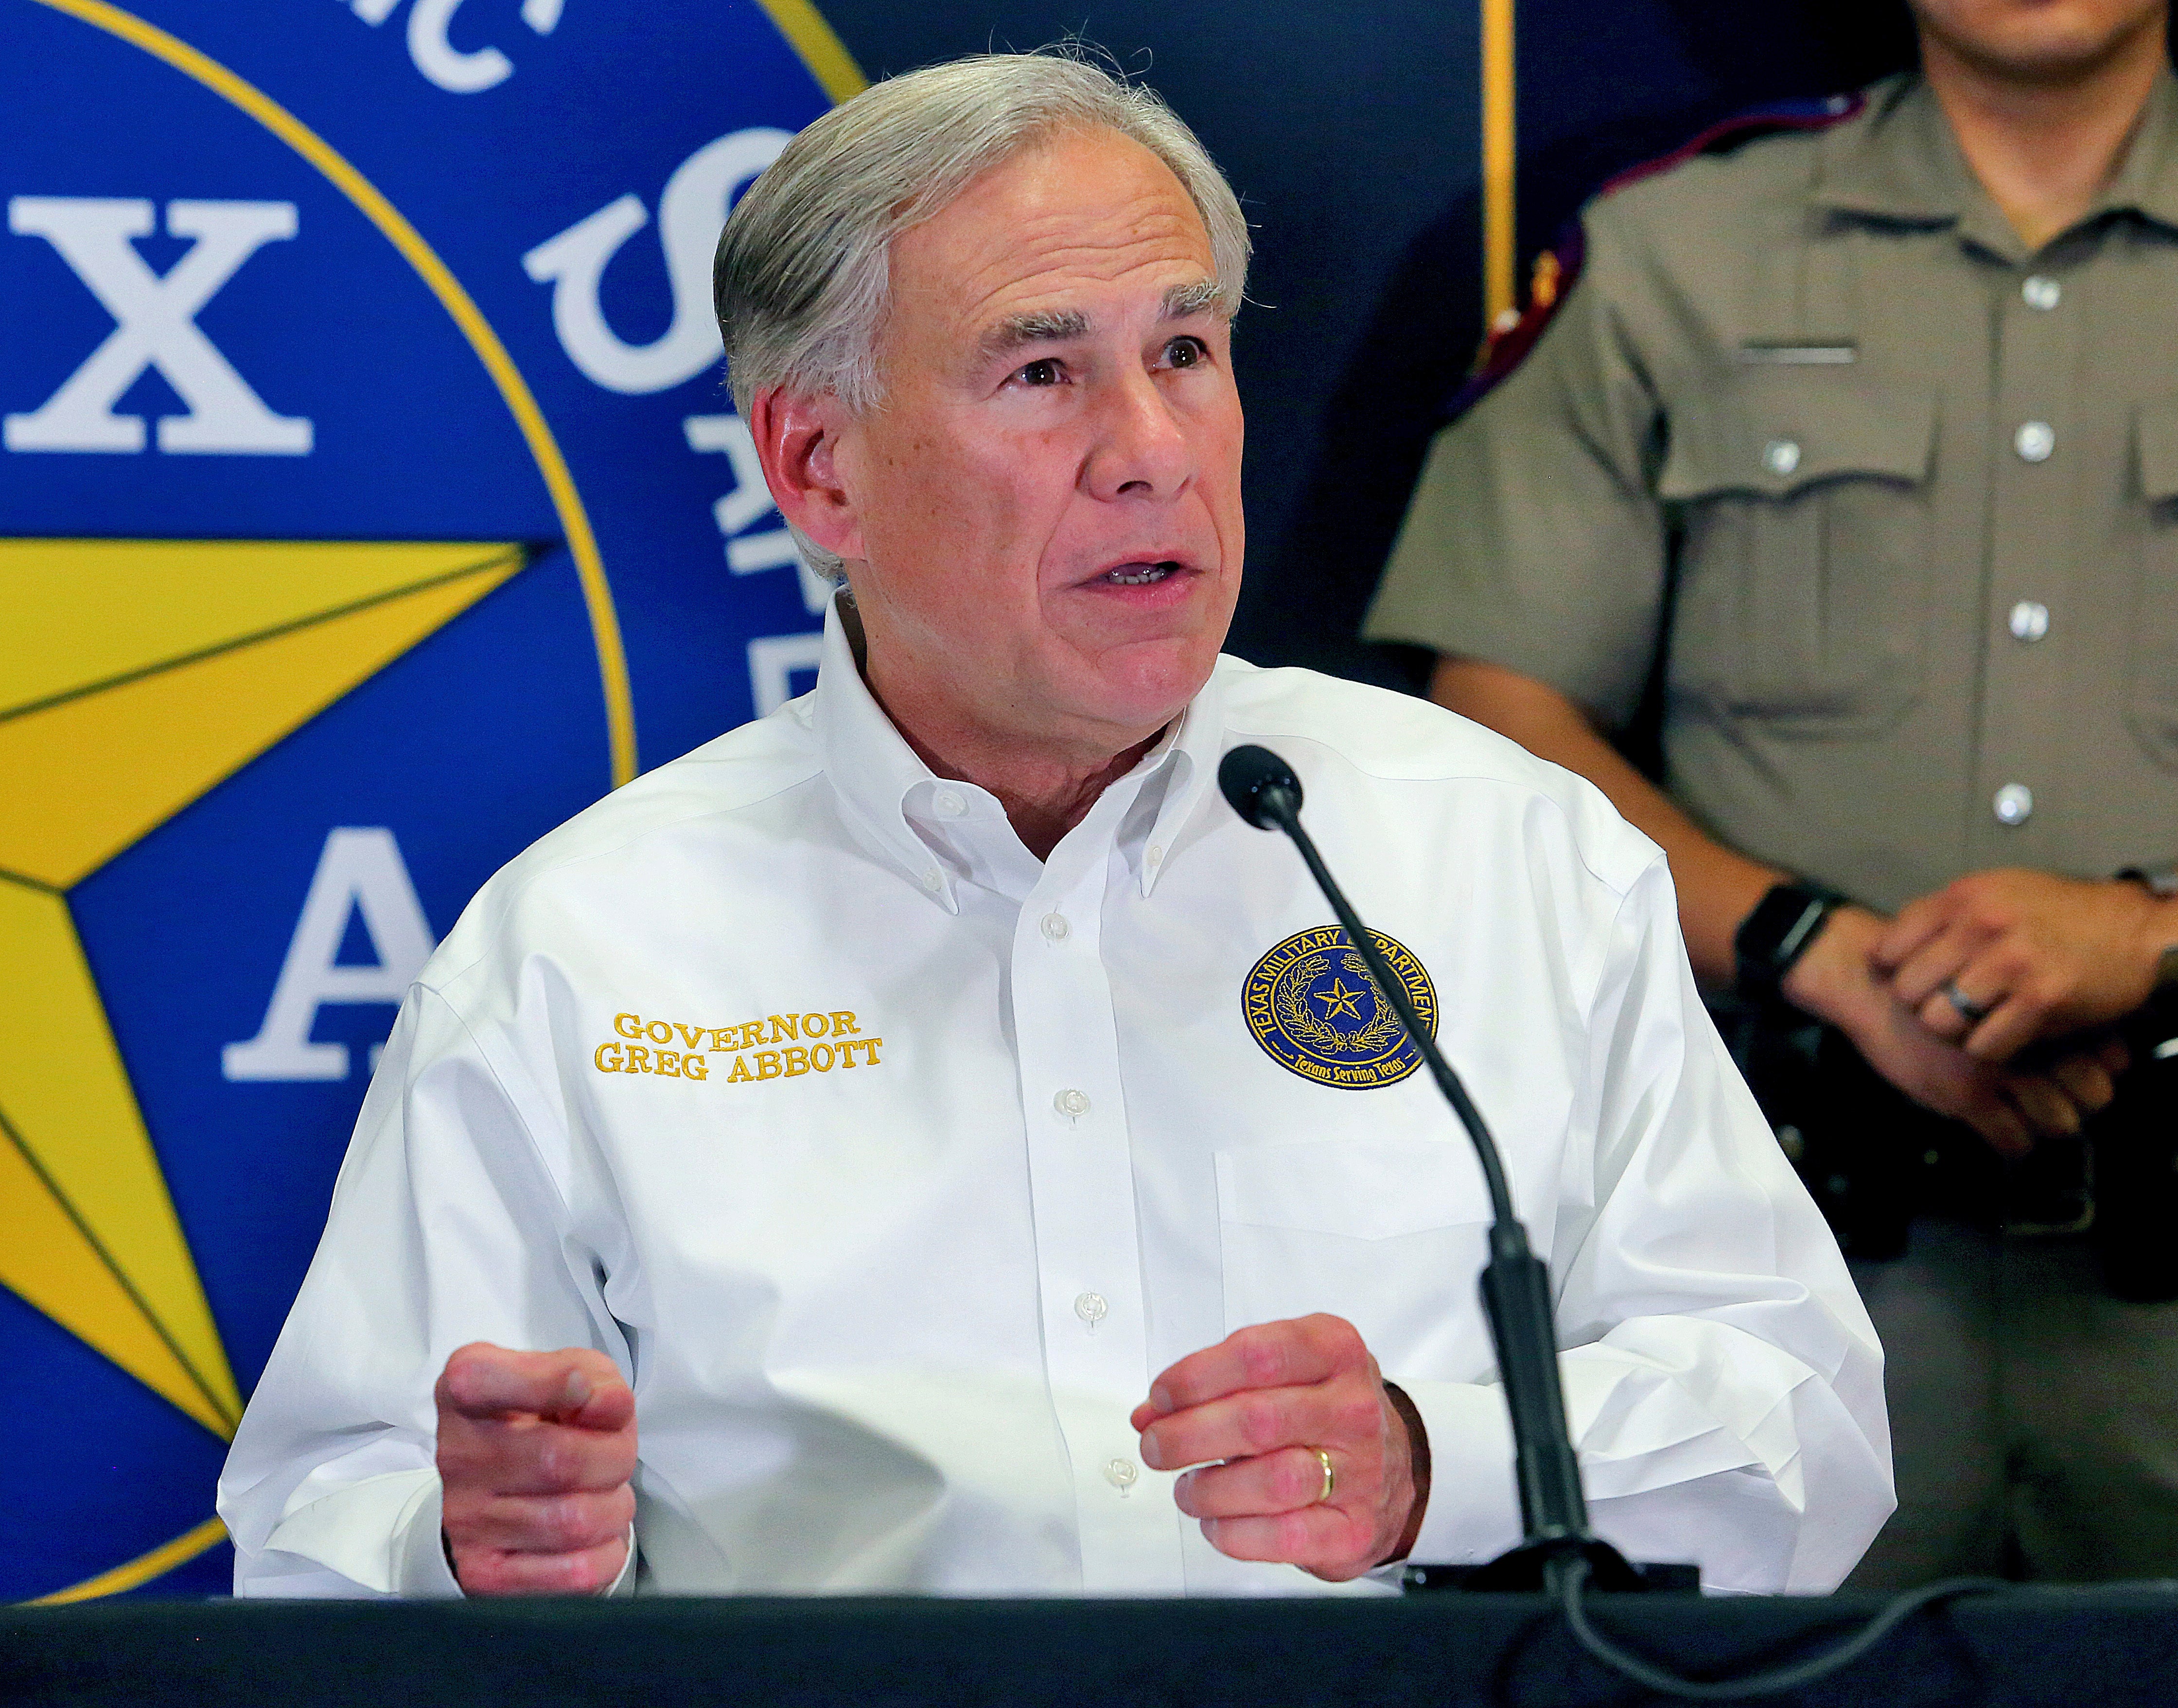 Governor Greg Abbott is scheduled to give a press conference on the school shooting in Uvalde, Texas